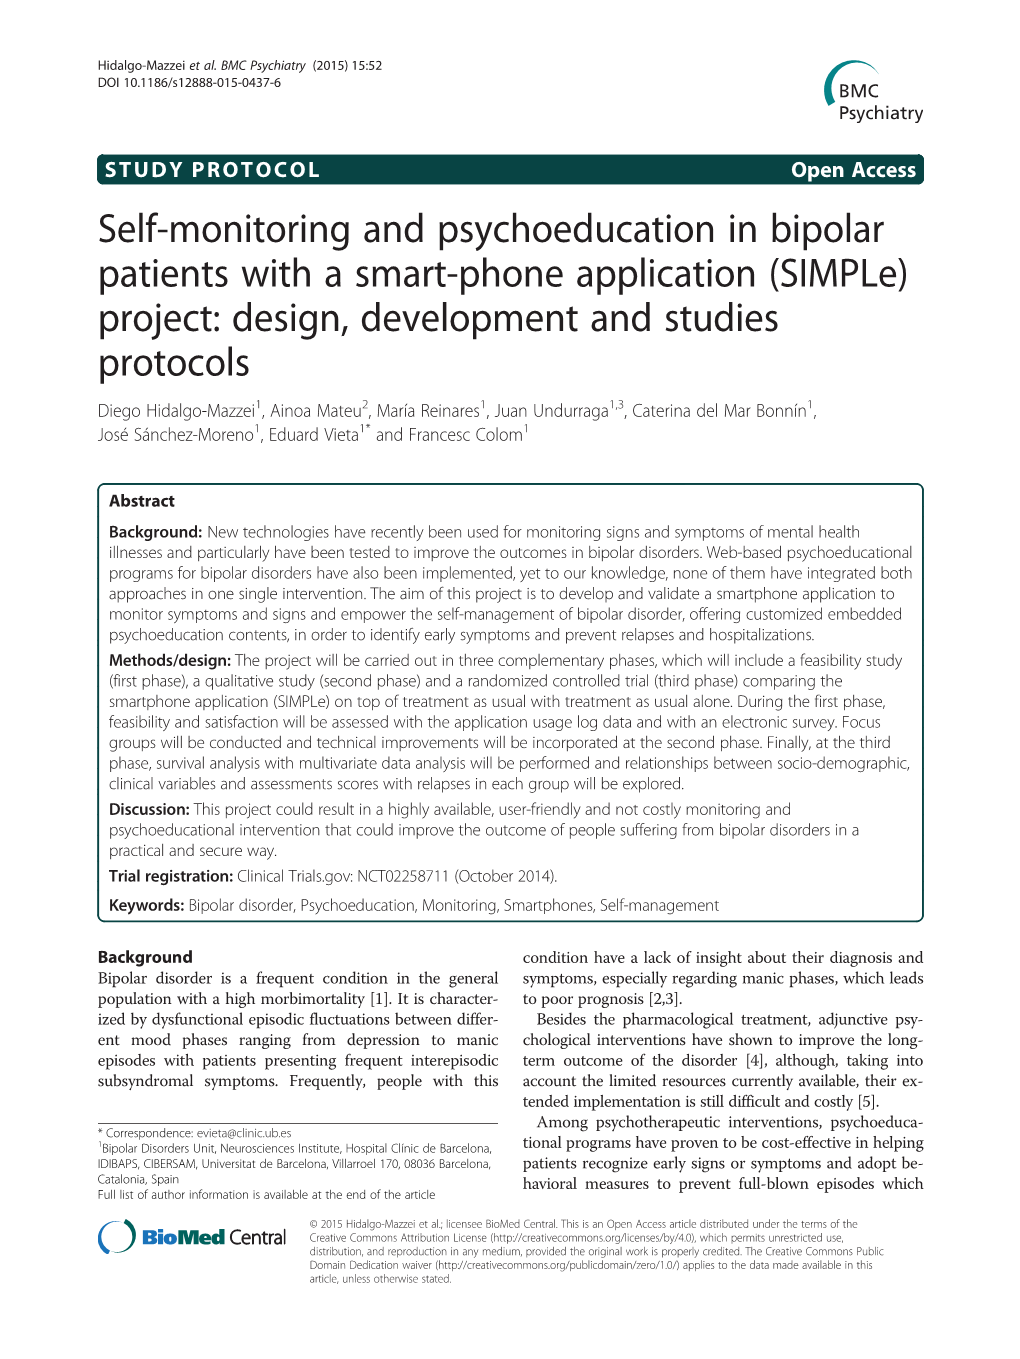 Self-Monitoring and Psychoeducation in Bipolar Patients with a Smart